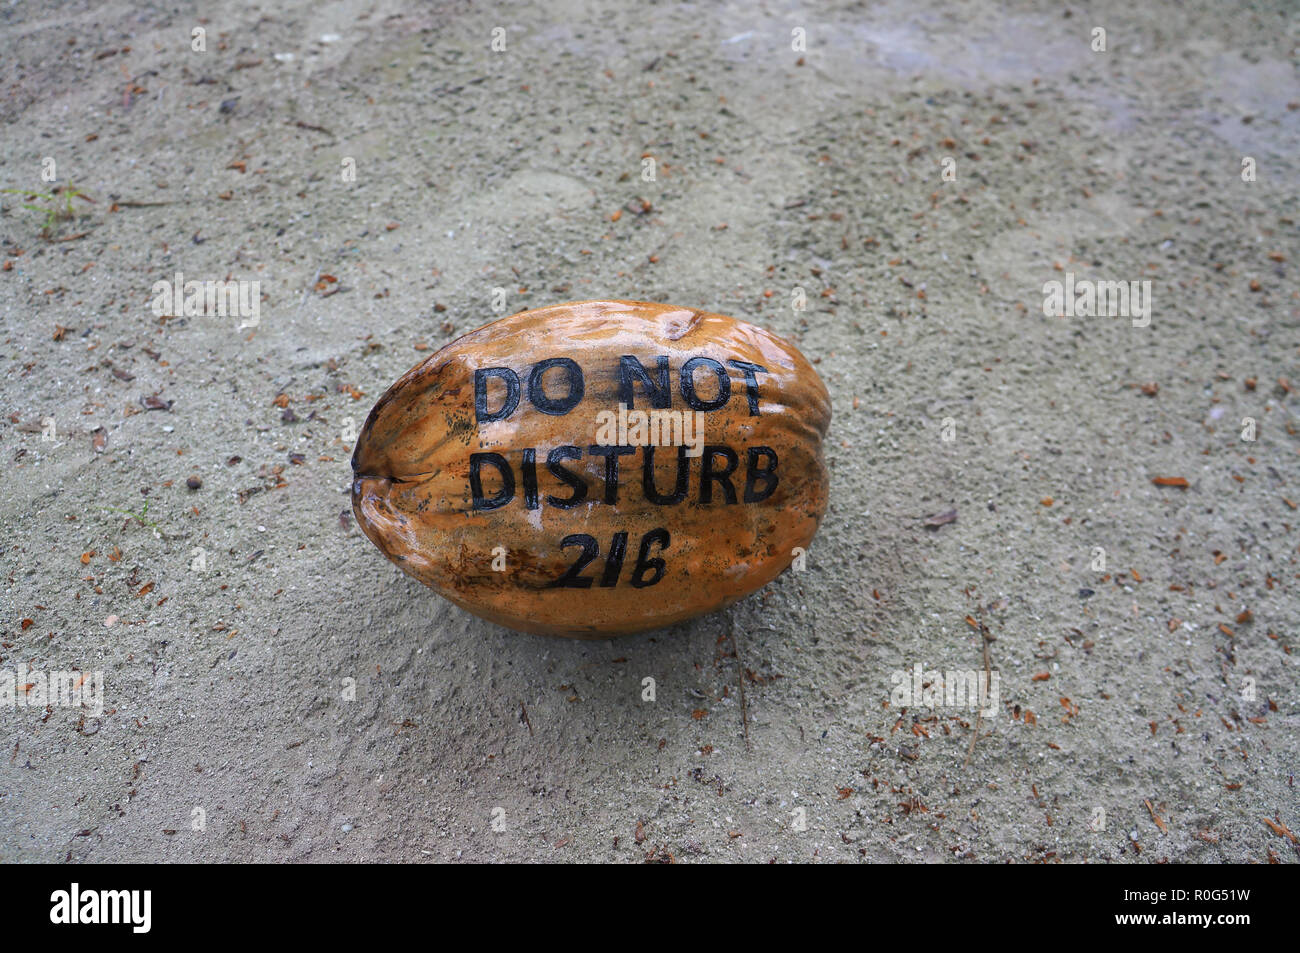 Coconut with writing on its shell lying on the sand of a beach as hotel guests request art sign not to disturb. Exotic travel destination for holiday, Stock Photo